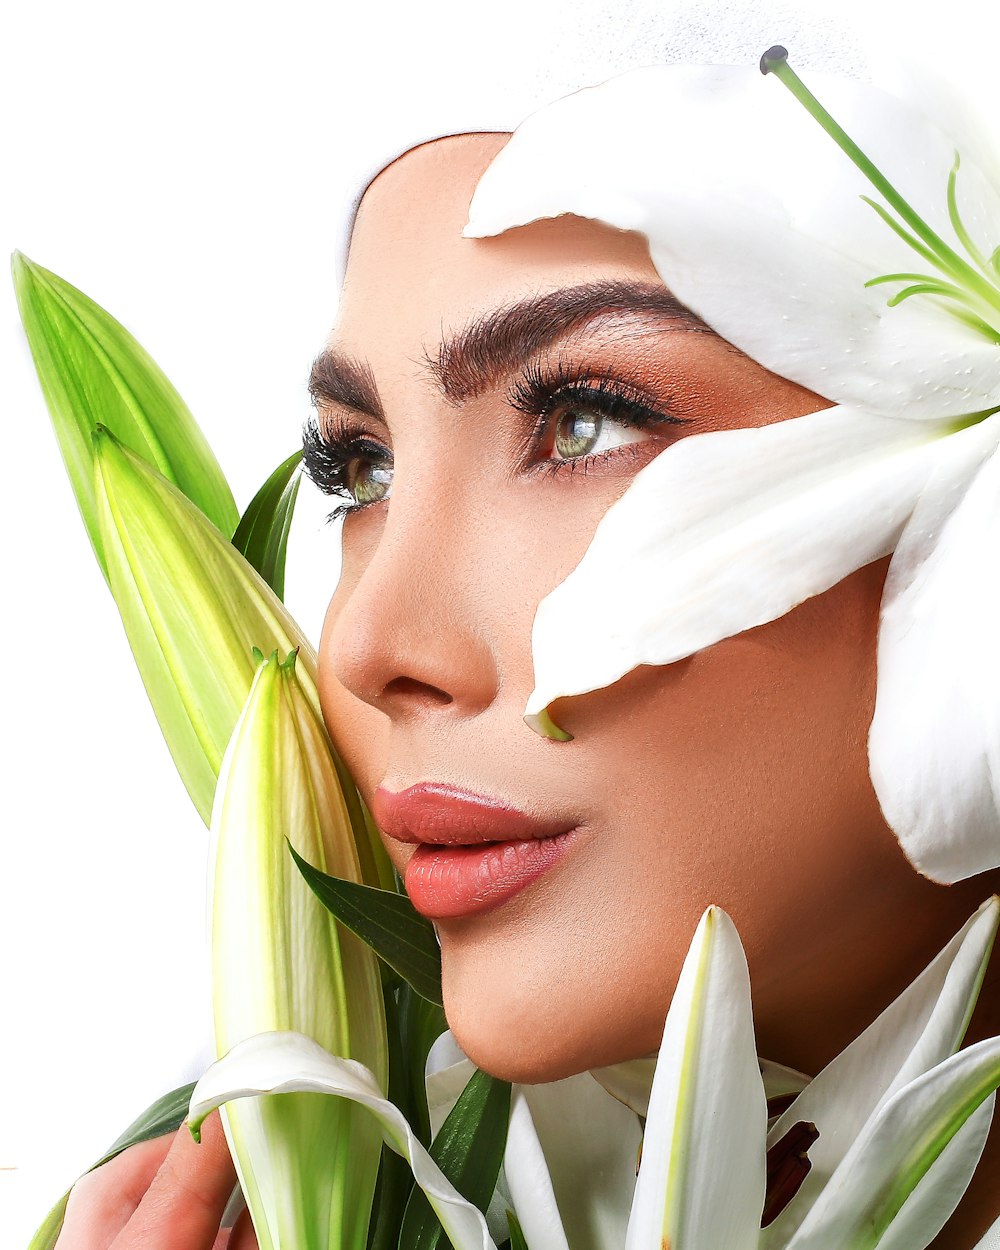 woman with white flower on her face